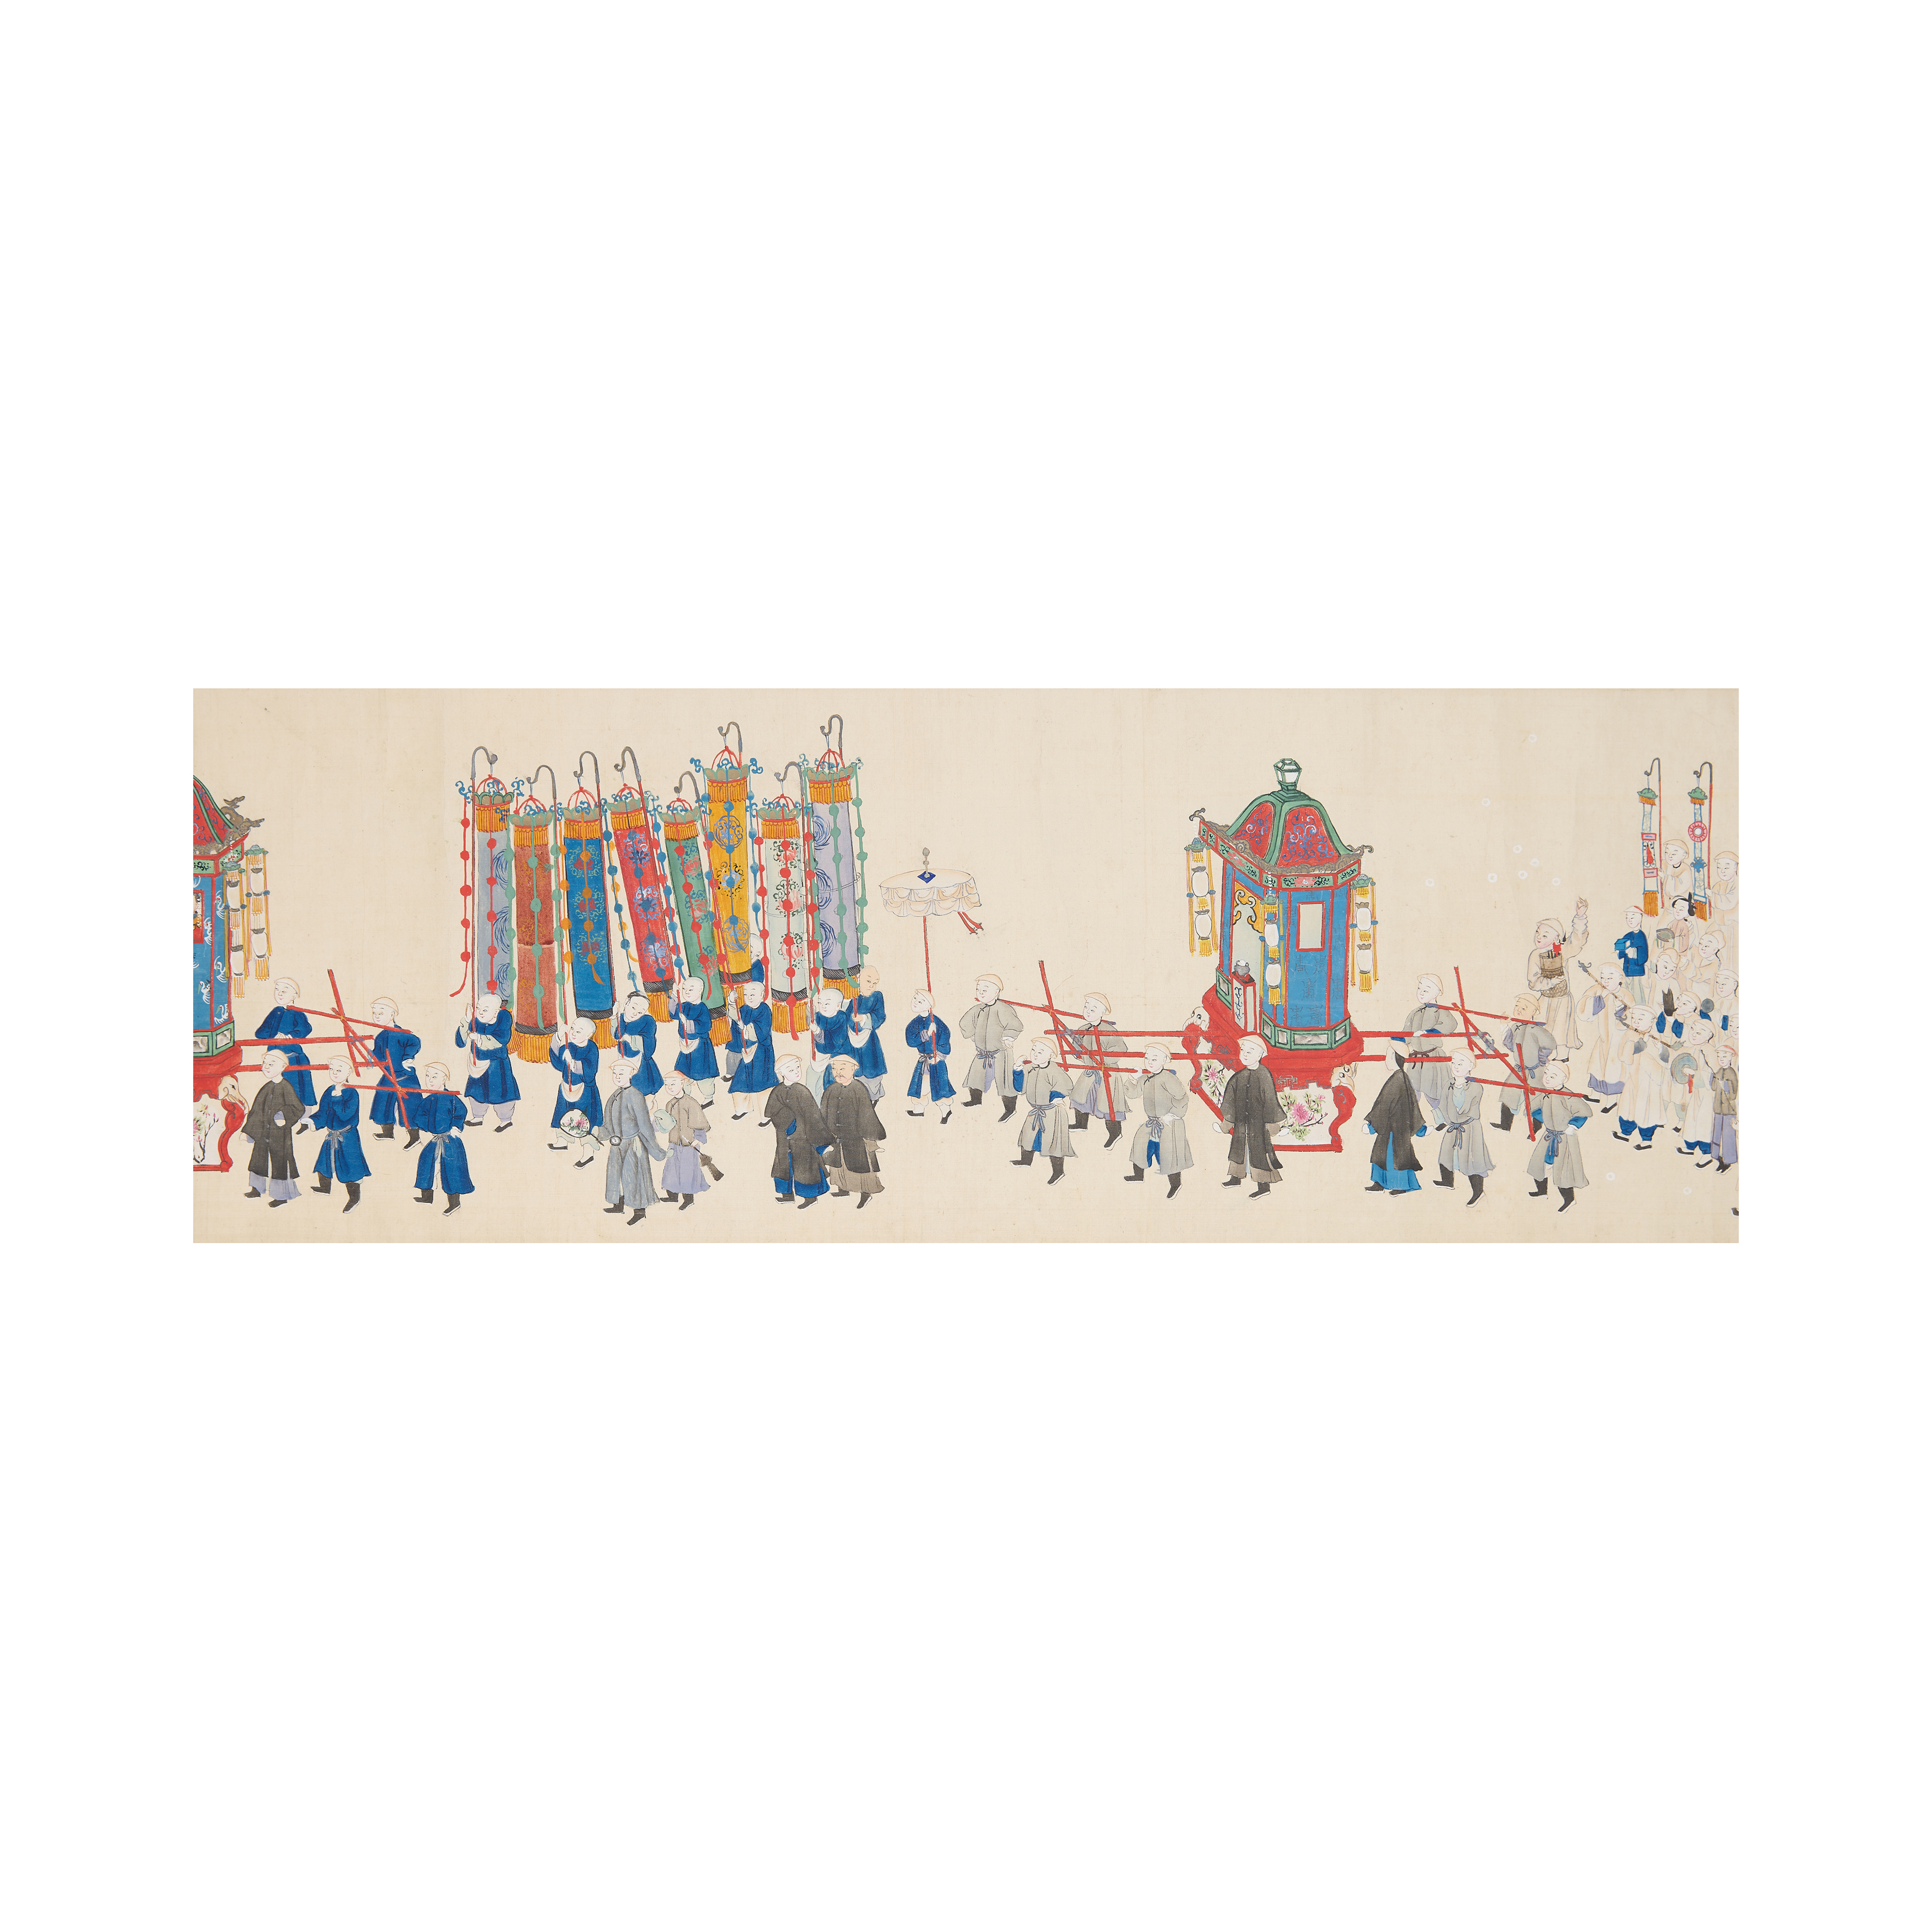 After Xue Ji (649 - 713) 'Procession' Ink and colour on silk, mounted as handscroll, 321cm x 25... - Image 6 of 8